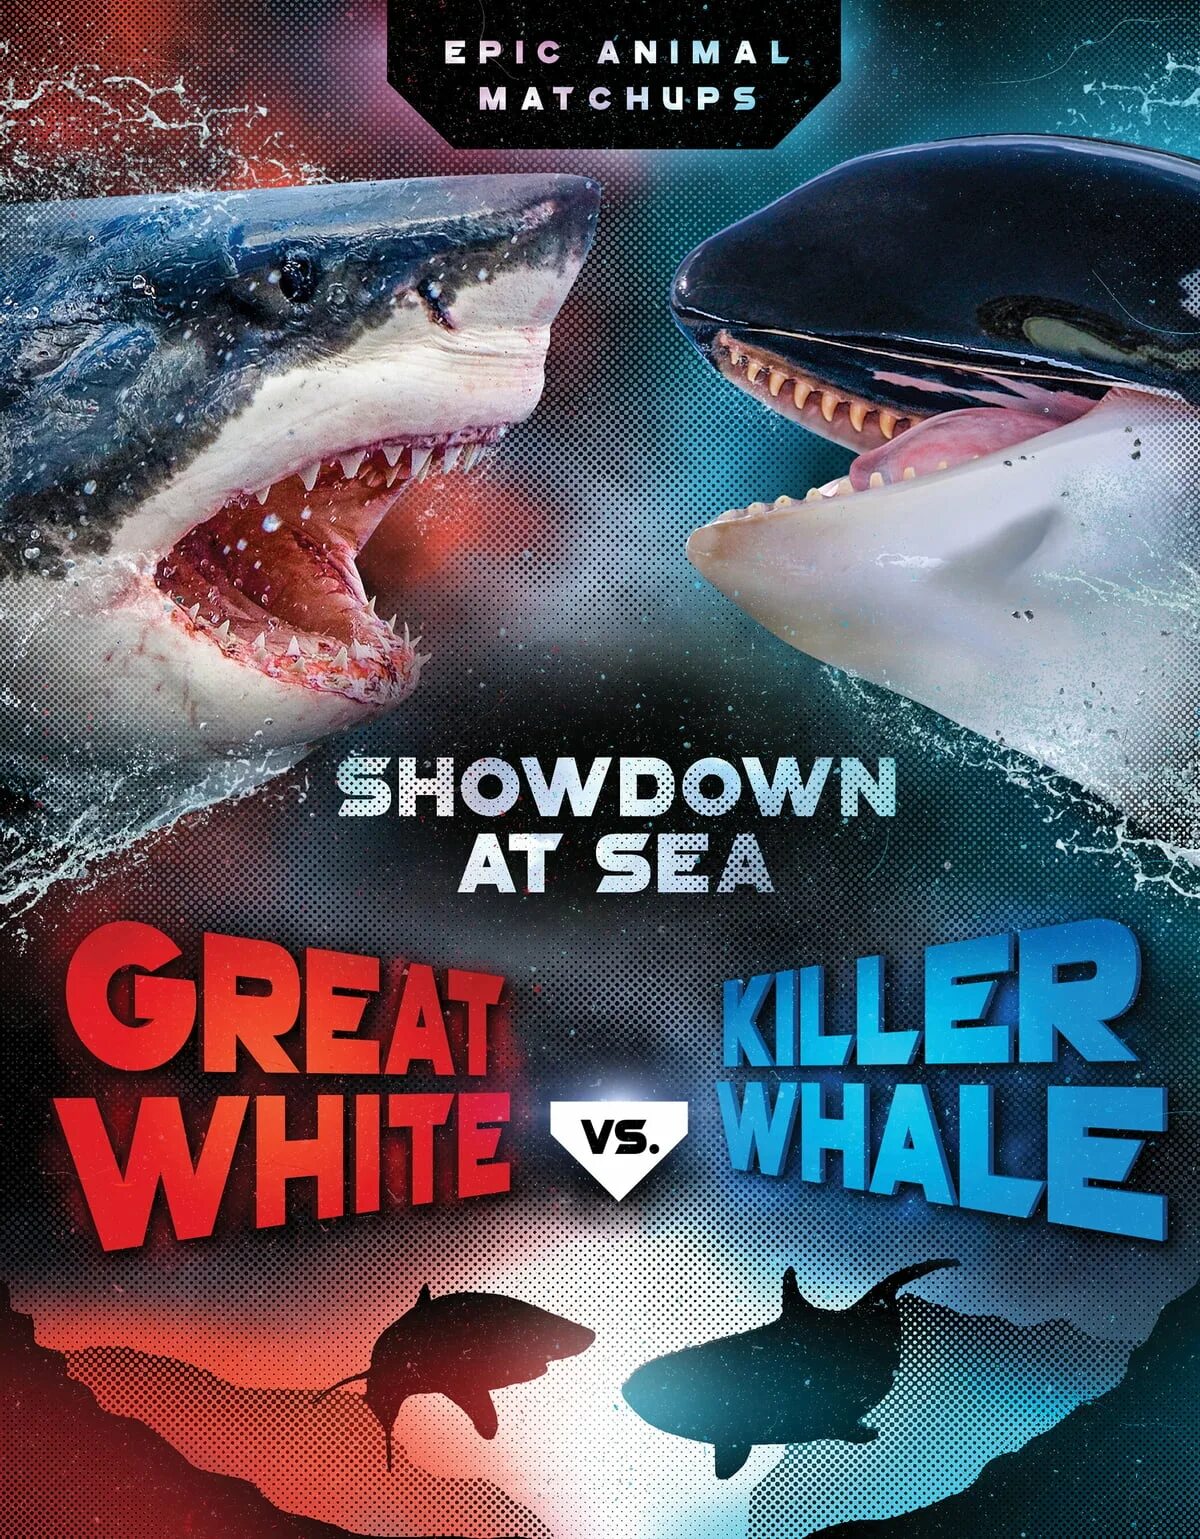 Killer Whale and great White Shark. Epic animals игрушки. Killer Whale vs jaws.